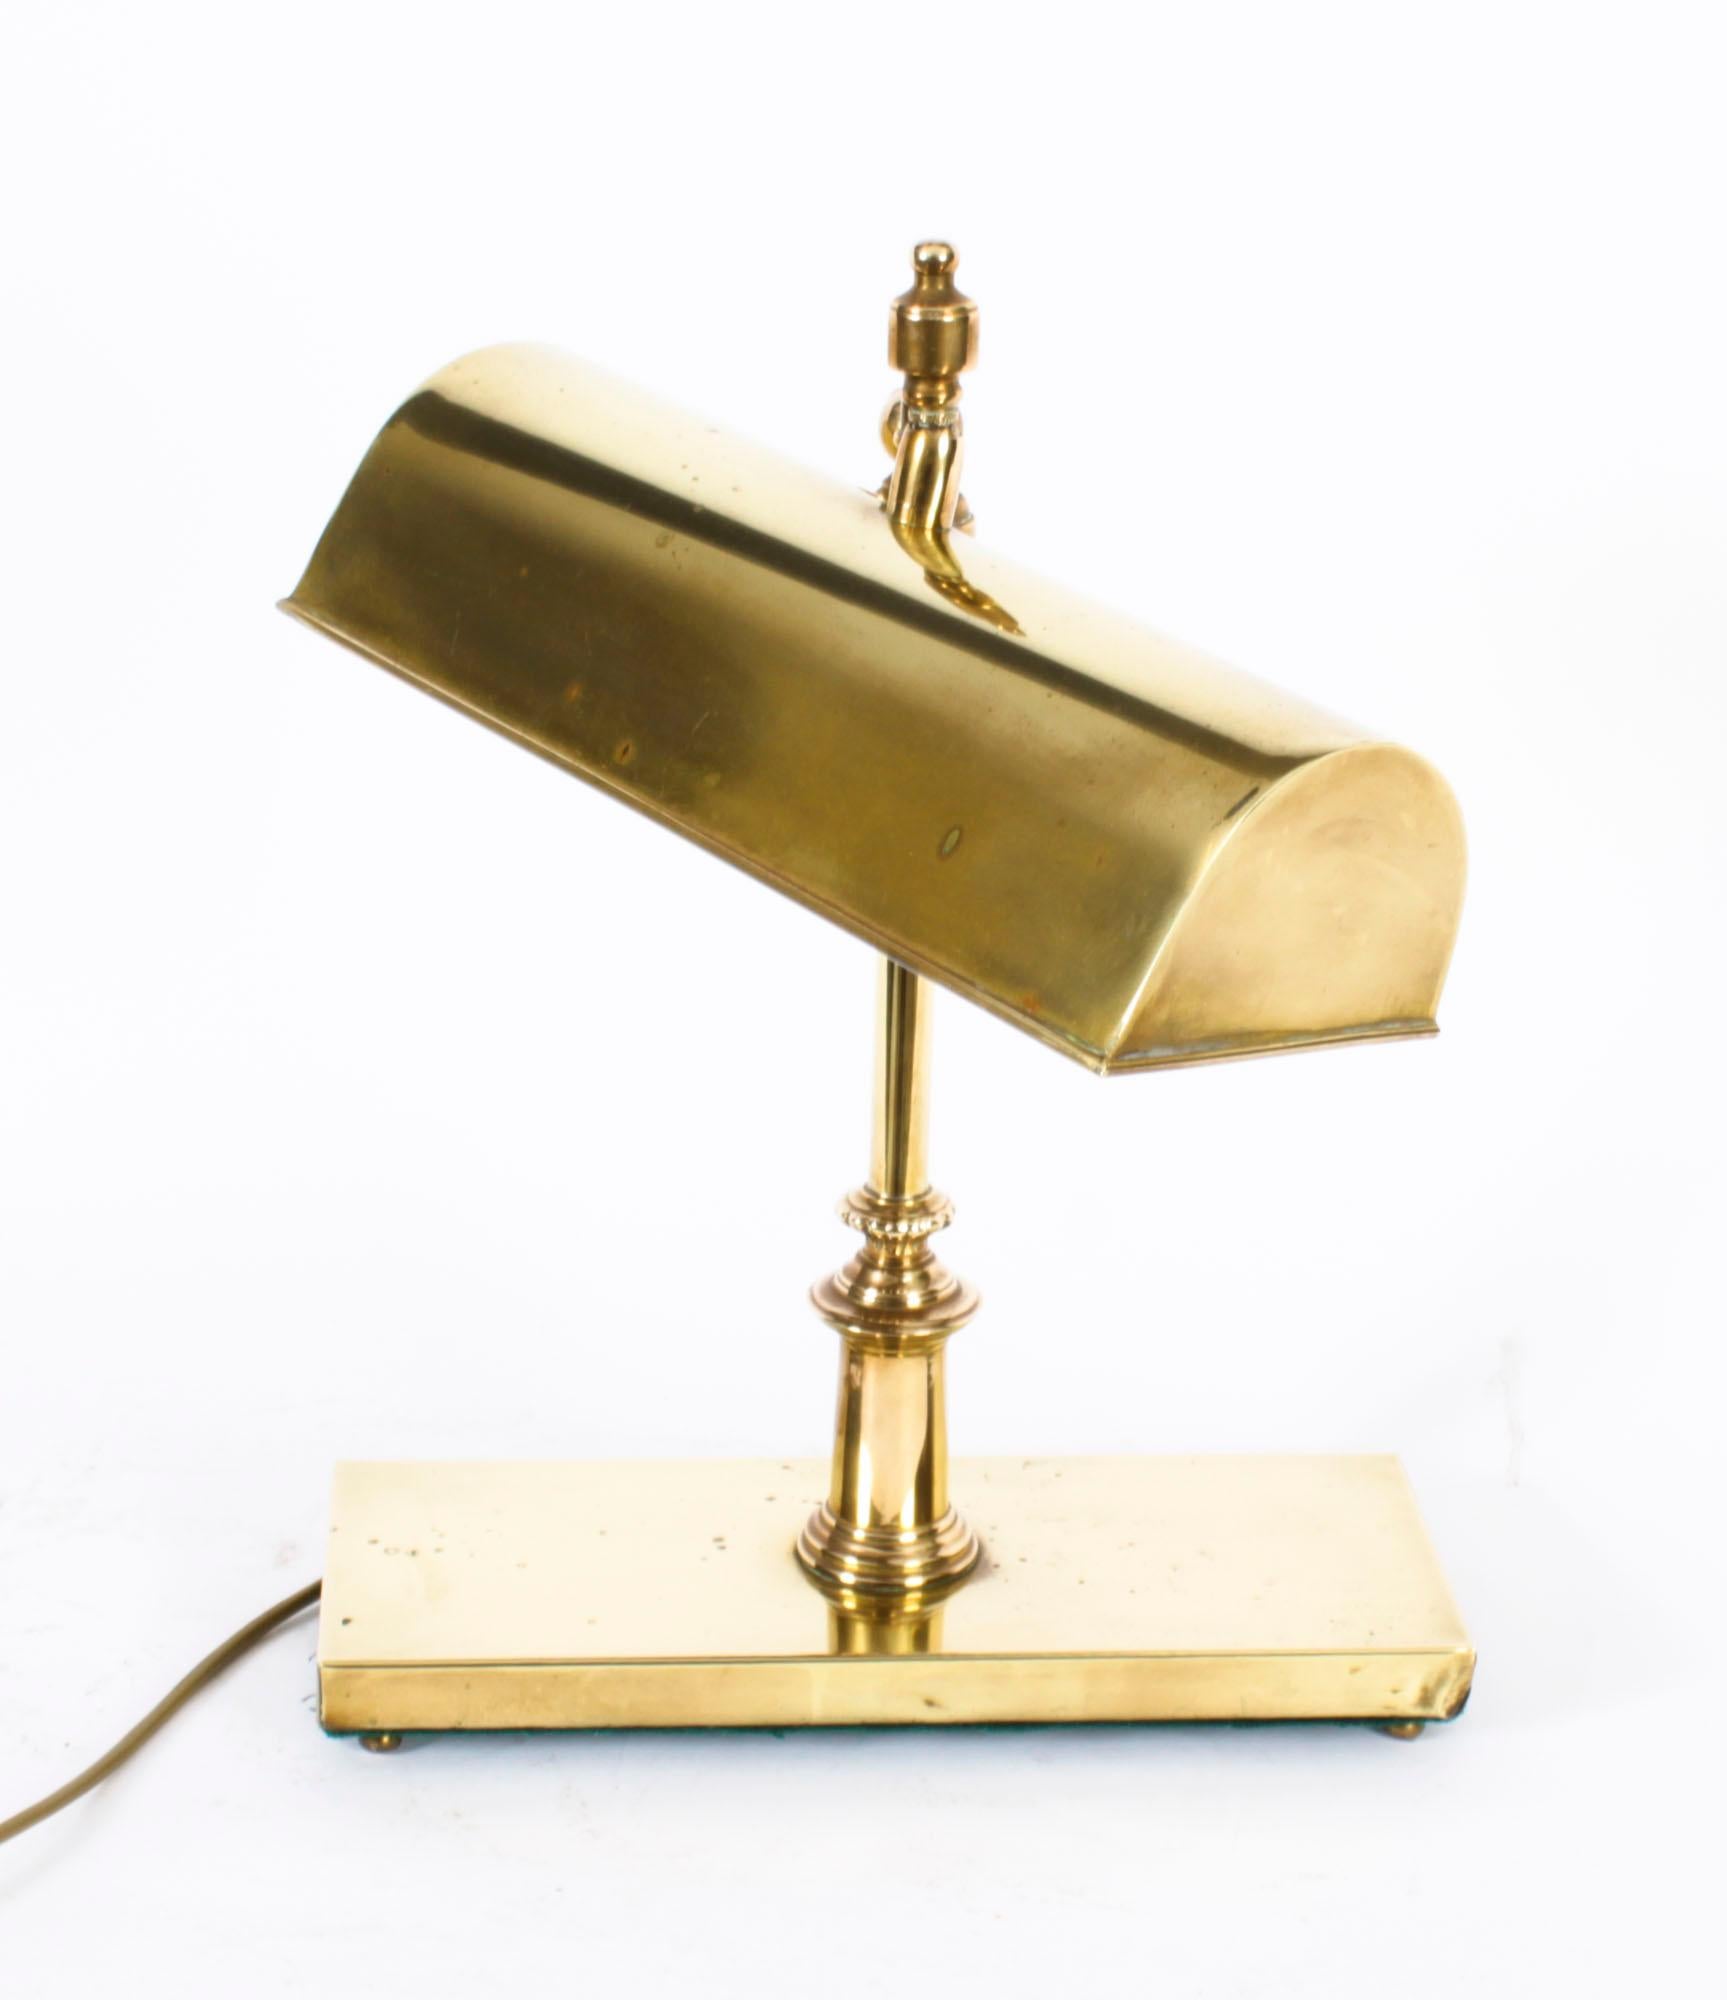 This is a truly superb antique Art Deco articulated brass bankers lamp, circa 1920 in date.

It has an adjustable stem and is raised on a decorative rectangular base.
 
The craftsmanship is second to none throughout all aspects of this piece and it